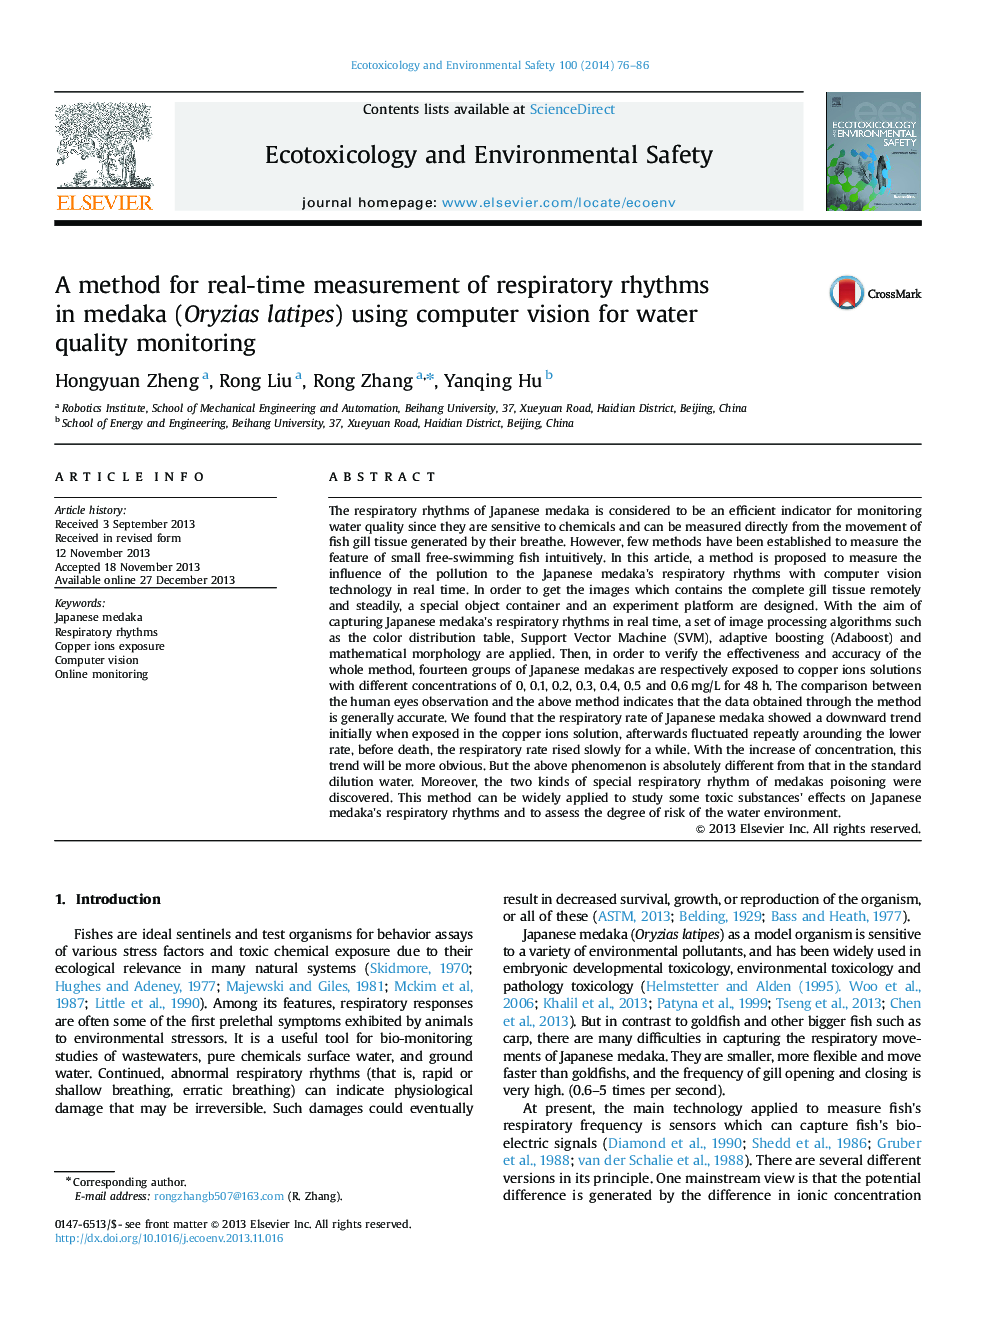 A method for real-time measurement of respiratory rhythms in medaka (Oryzias latipes) using computer vision for water quality monitoring